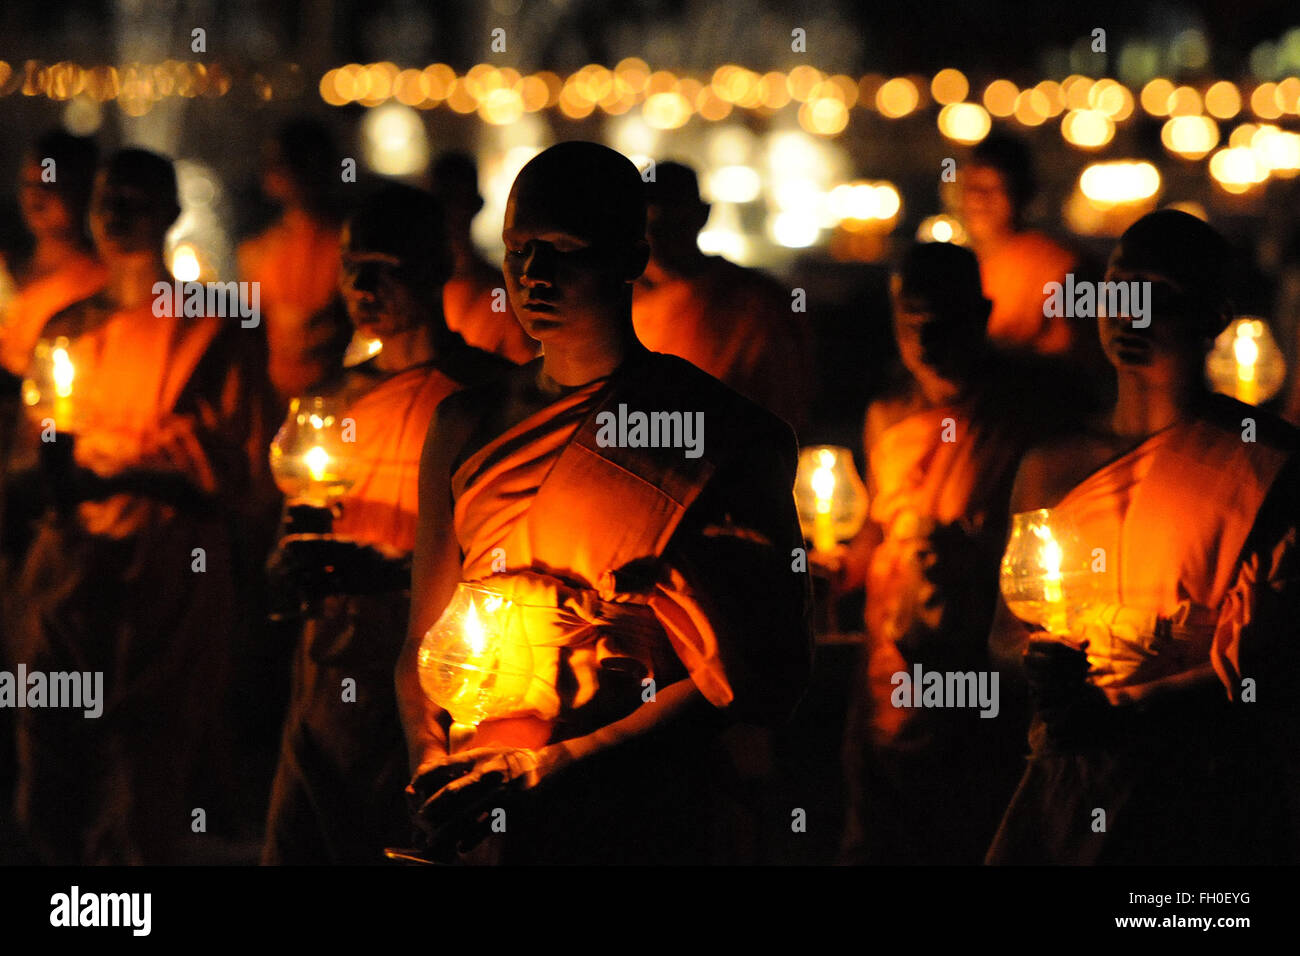 Pathum Thani, Thailand. 22nd Feb, 2016. Thai Buddhist monks light candles and pray during Makha Bucha Day ceremonies at Wat Phra Dhammakaya Temple in Pathum Thani Province, Thailand, on Feb. 22, 2016. As one of Thailand's most important Buddhist festivals, Makha Bucha is observed every full moon night of the third month in the Thai lunar calendar. On the Makha Bucha day, people flock to temples and venerate Buddhas as well as pray for blessedness. Credit:  Rachen Sageamsak/Xinhua/Alamy Live News Stock Photo